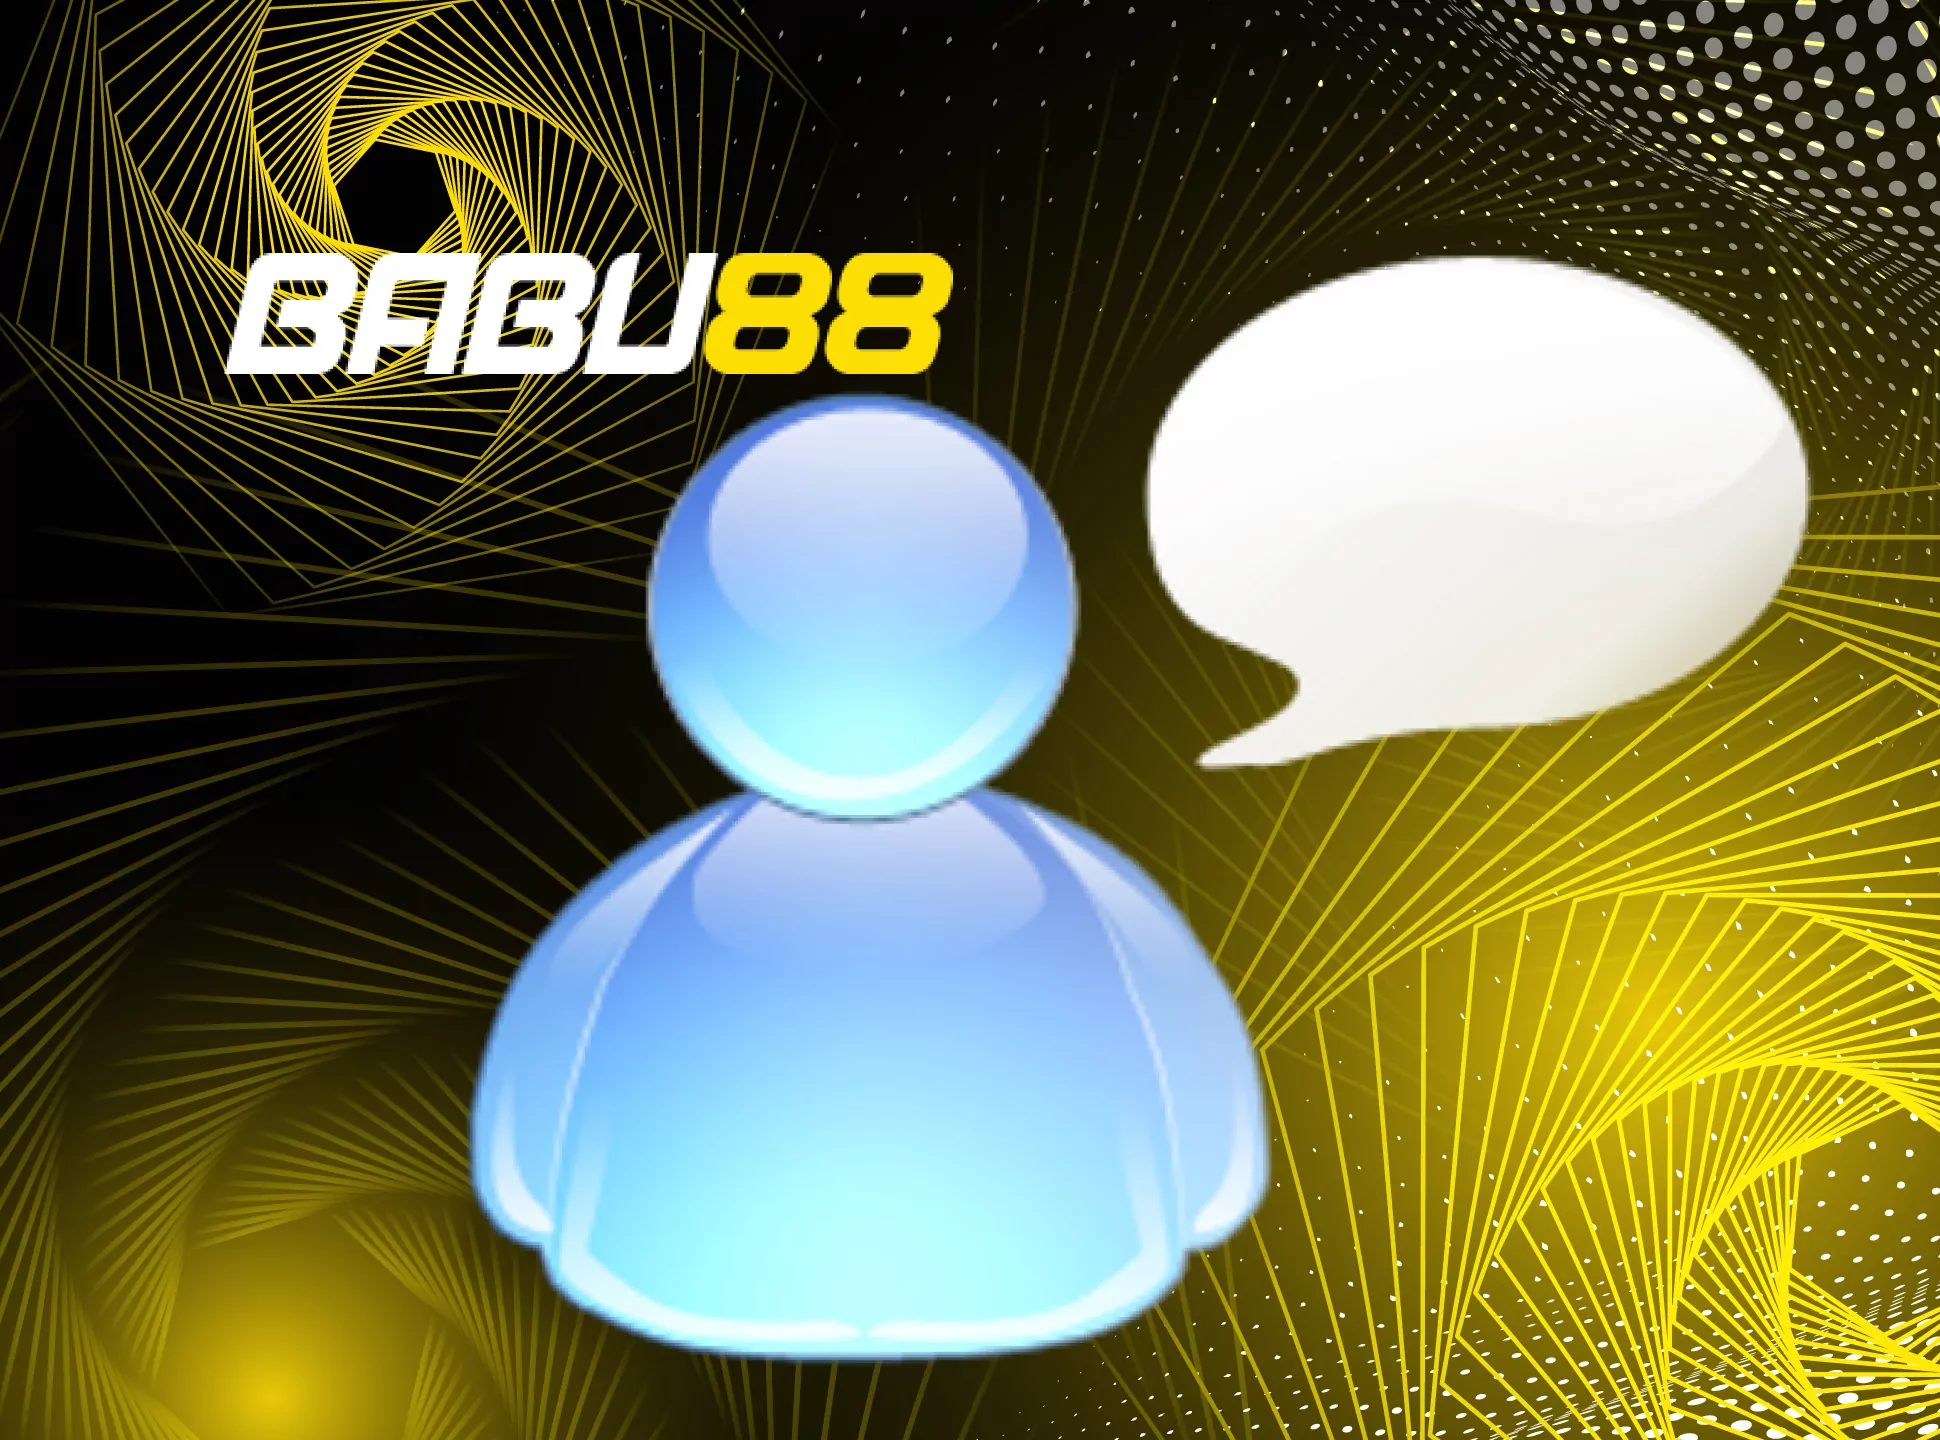 Use the live chat on the Babu88 site to get help fron the customer service.